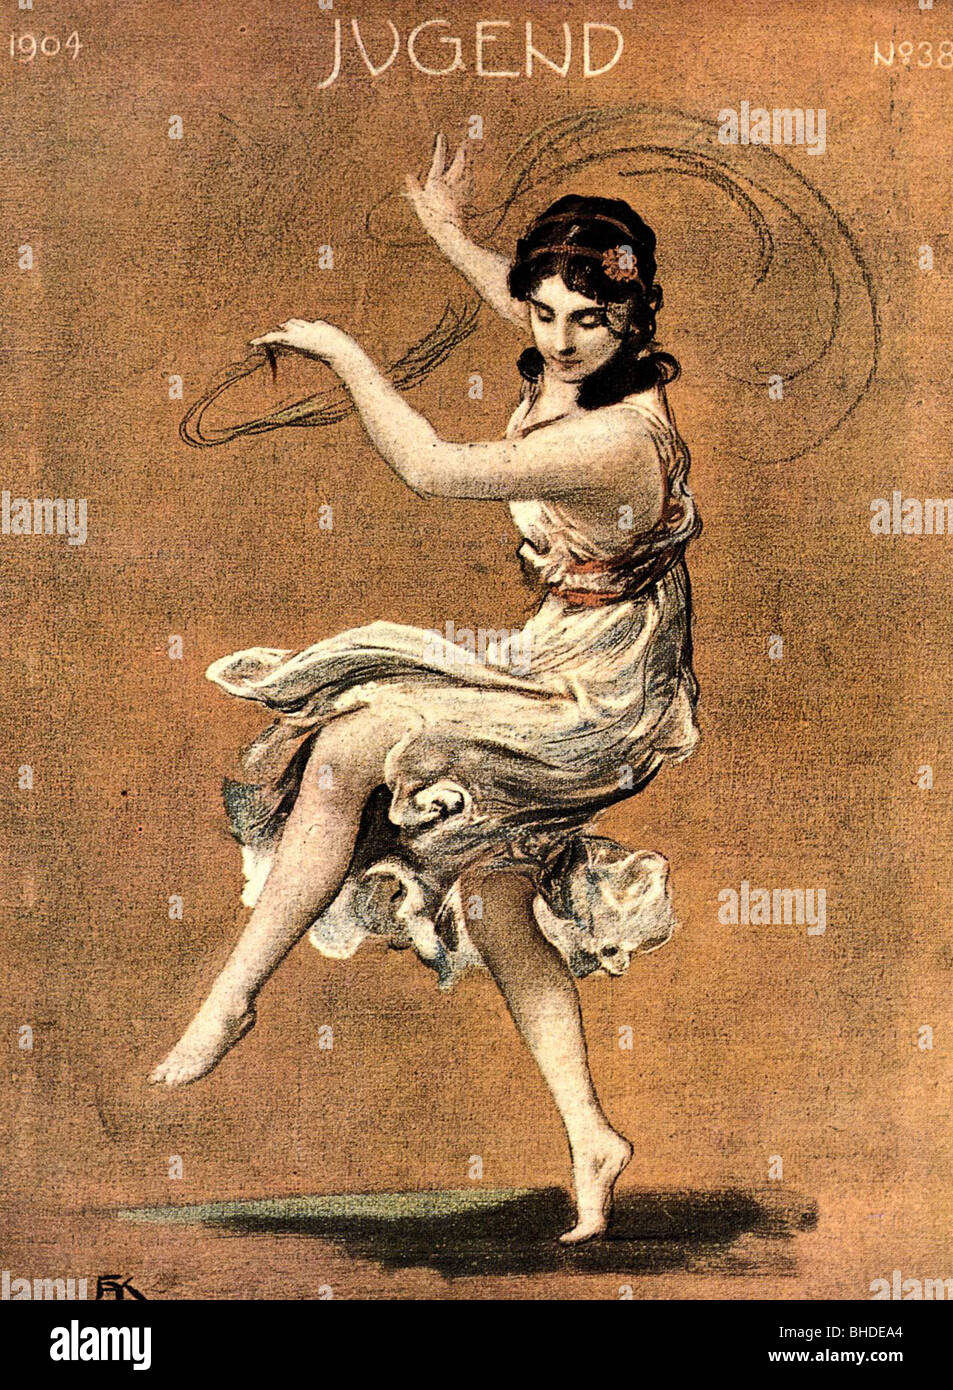 Duncan, Isadora  26.5.1877 - 14.9.1927, US dancer, full length, dancing, title page of the magazine 'Jugend', No. 38, 1904, pastel, by Fritz August von Kaulbach (1850 - 1920), Stock Photo